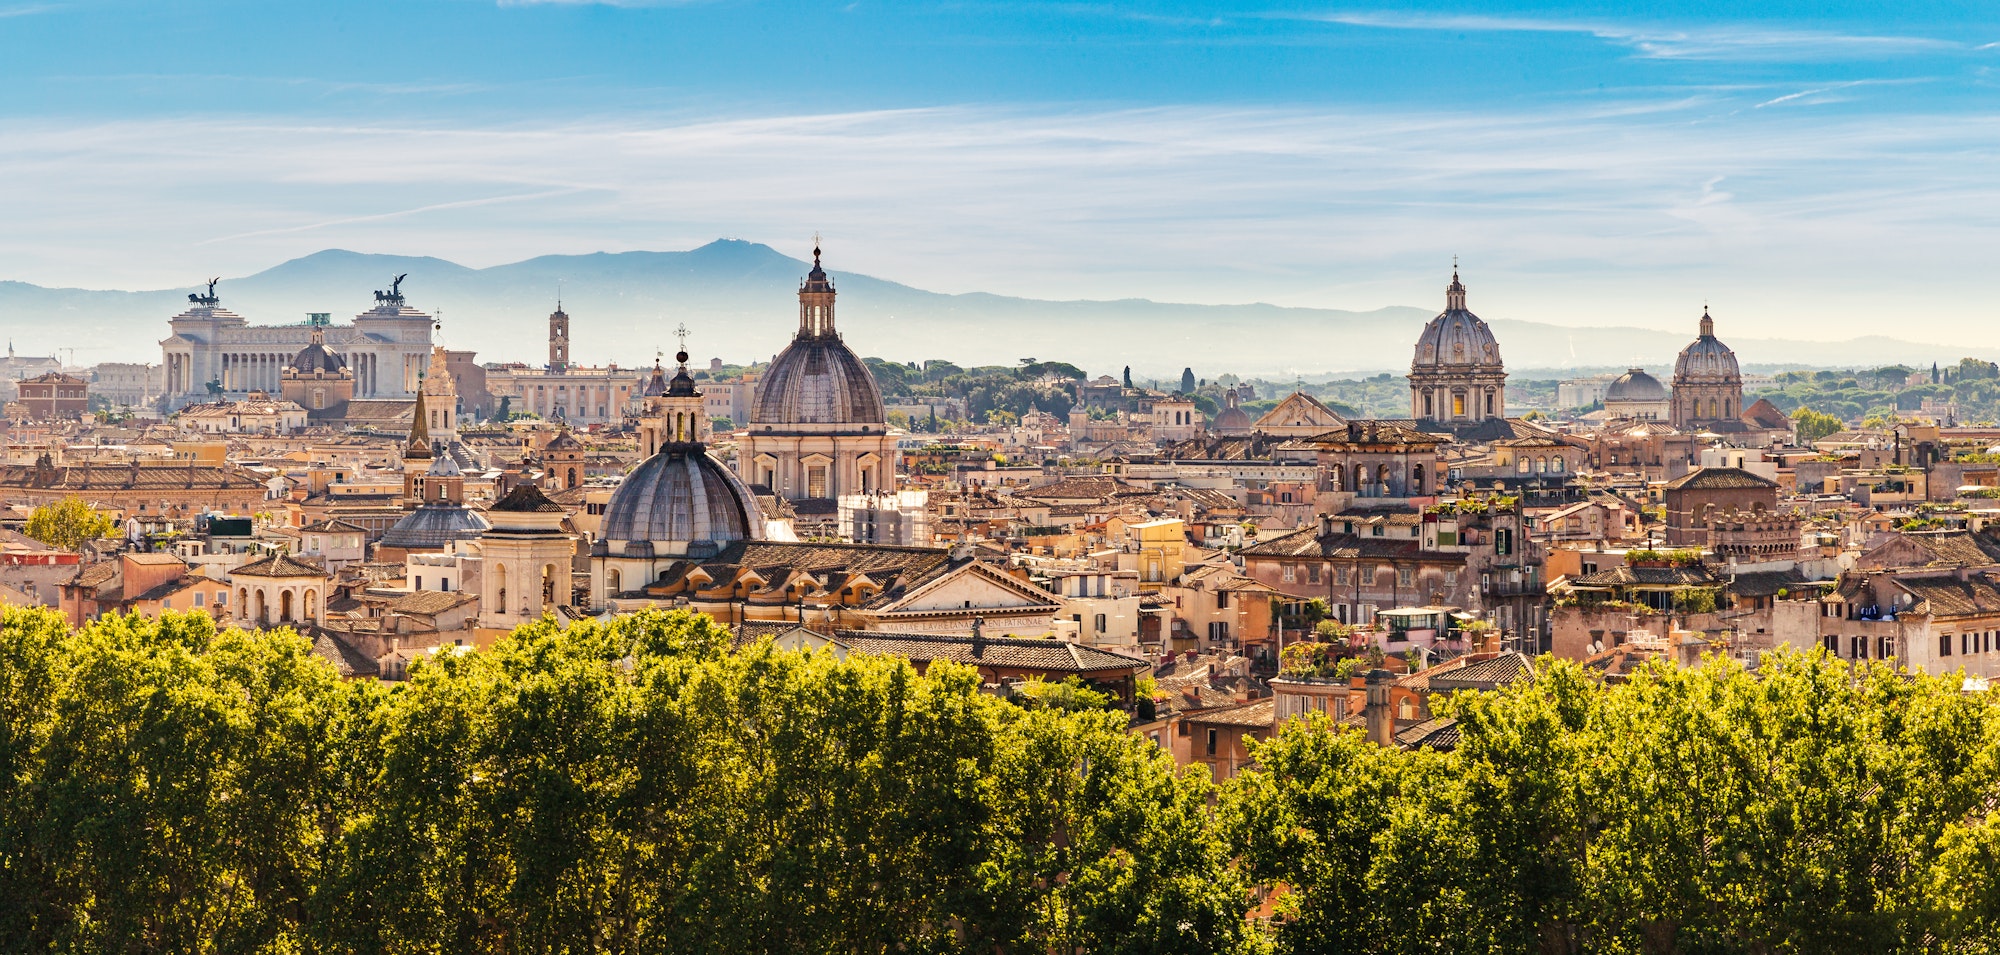 Panorama of Rome, Italy from the Castel Sant'Angelo